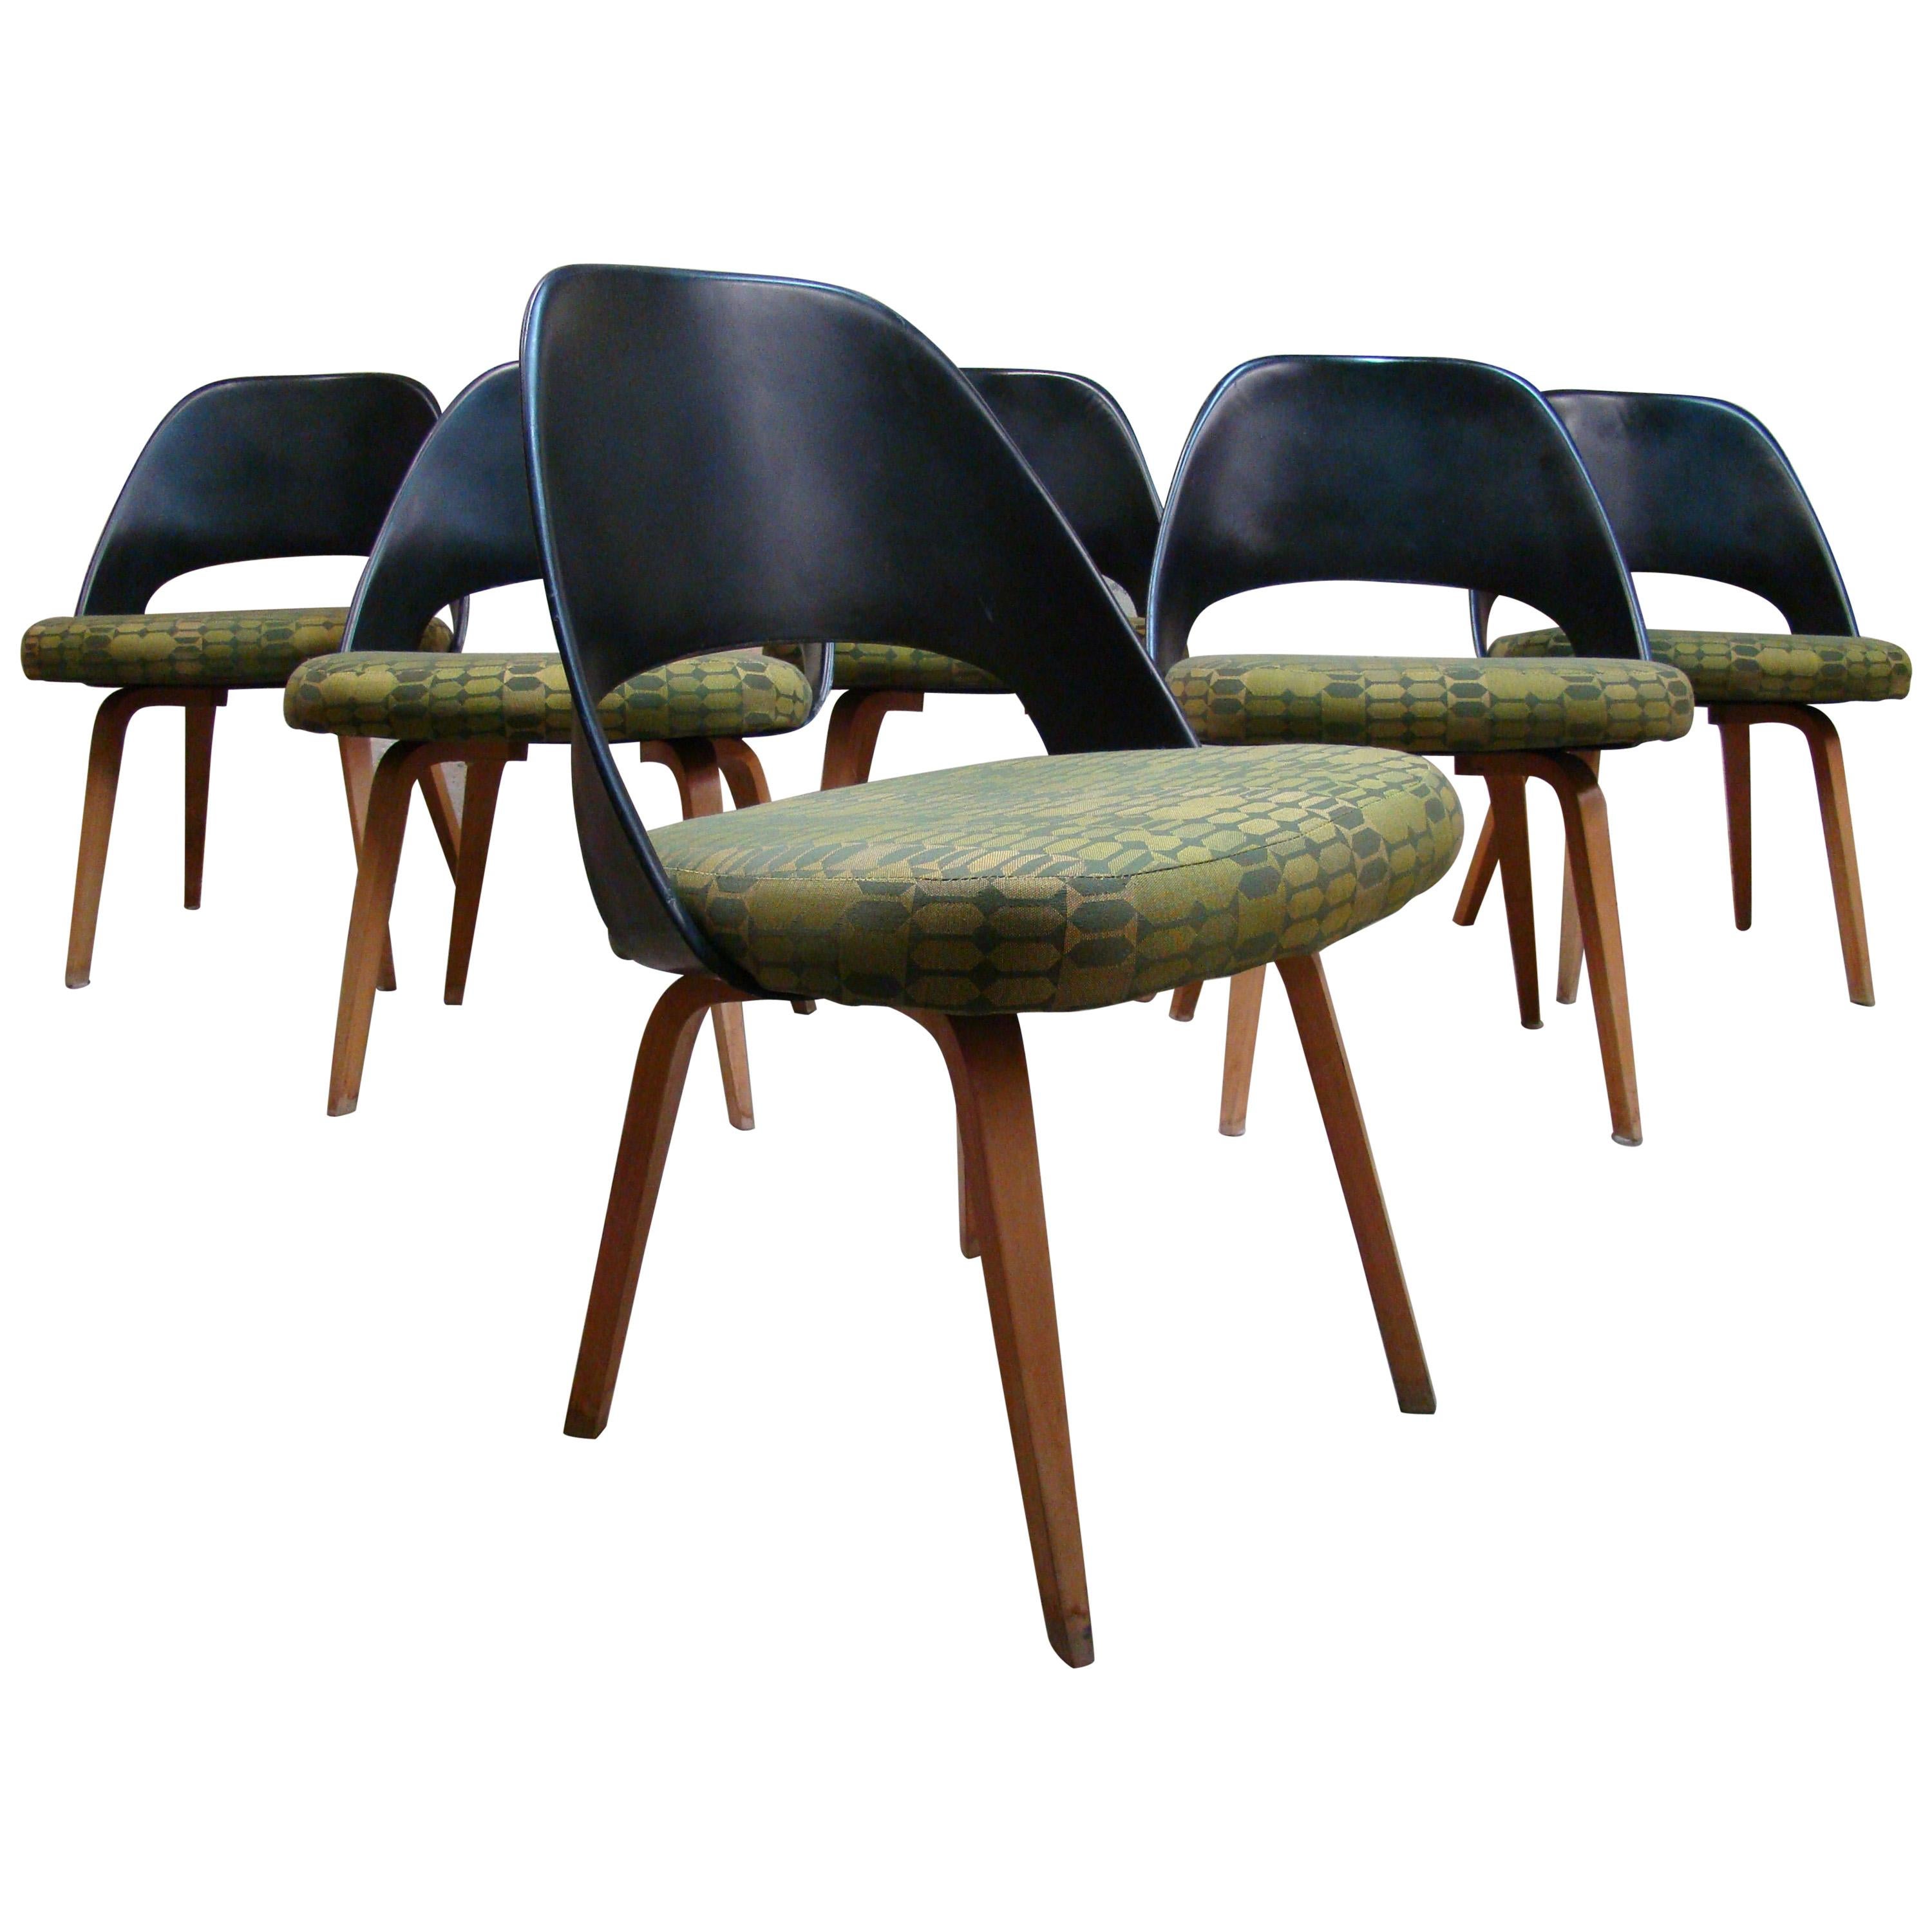 Mid-Century Modern Dining Chairs Designed by Eero Saarinen for Knoll Associates 'only 4 available'